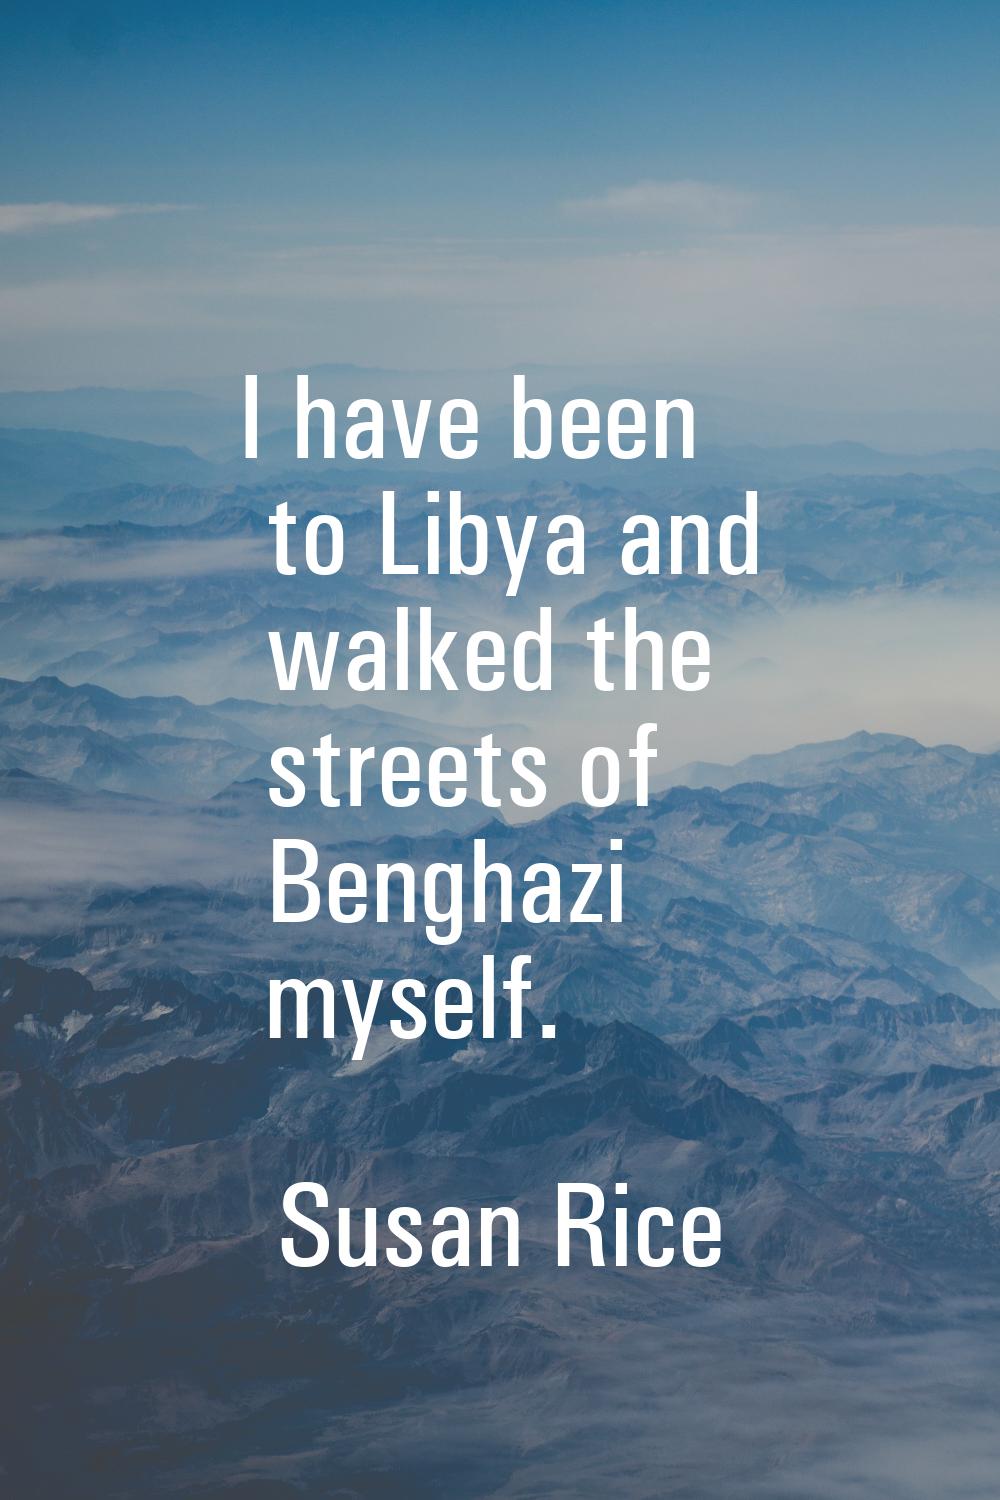 I have been to Libya and walked the streets of Benghazi myself.